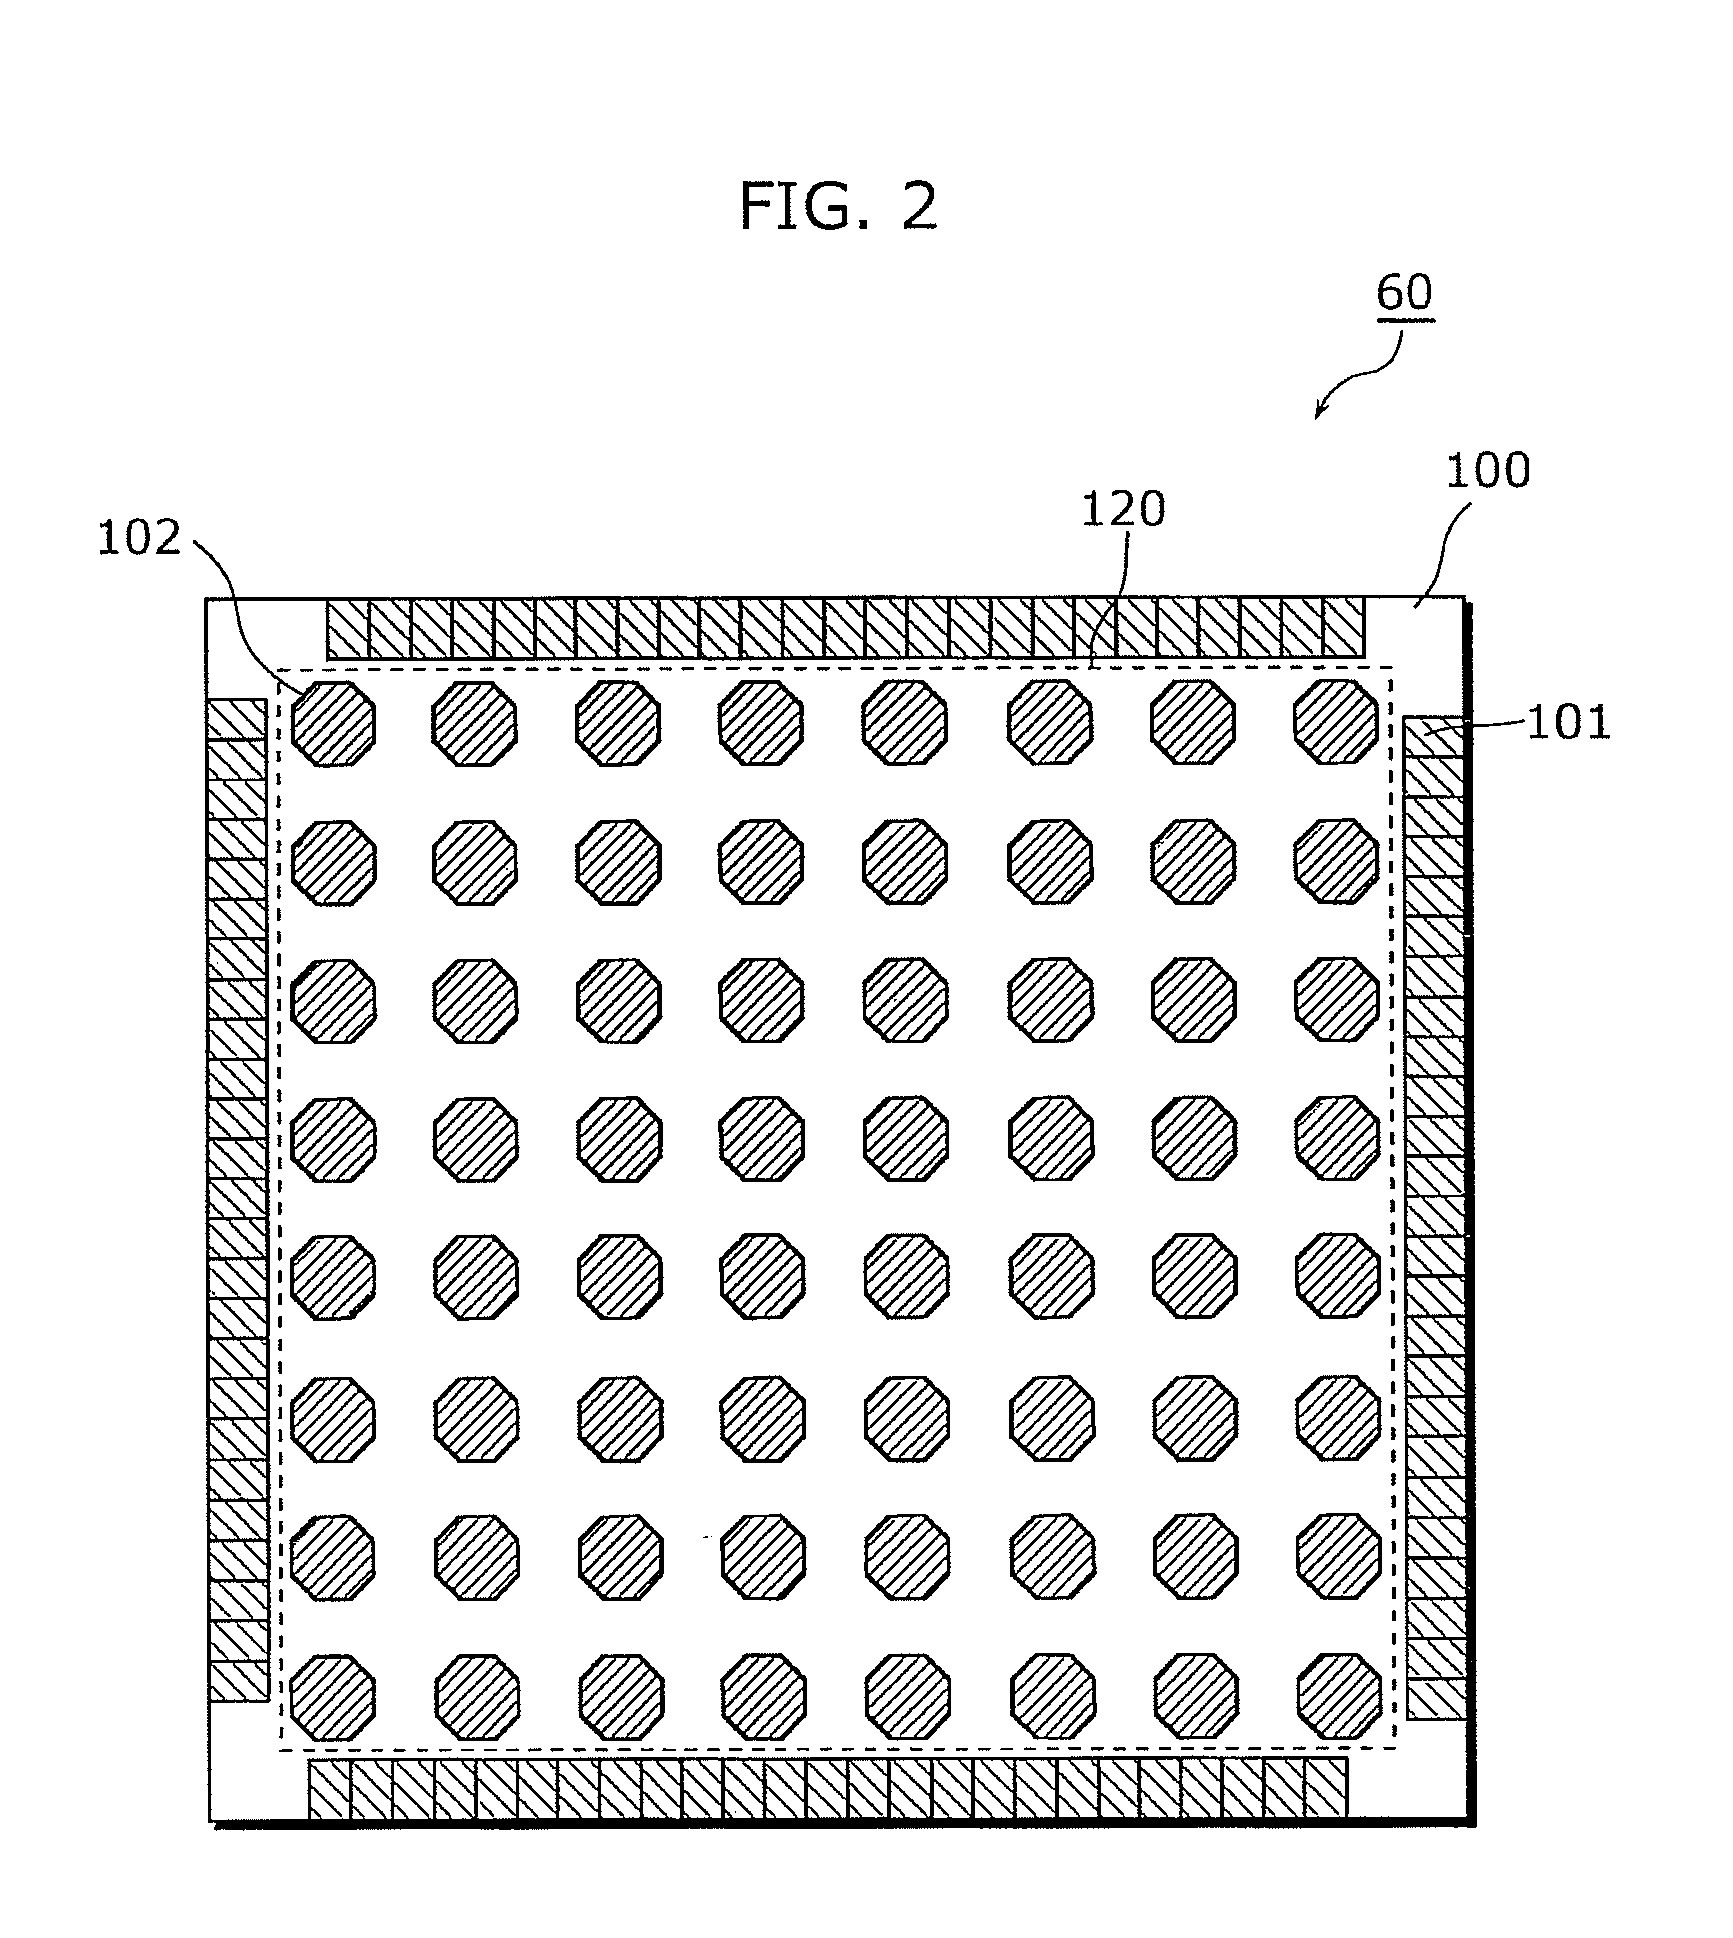 Semiconductor device including external connection pads and test pads